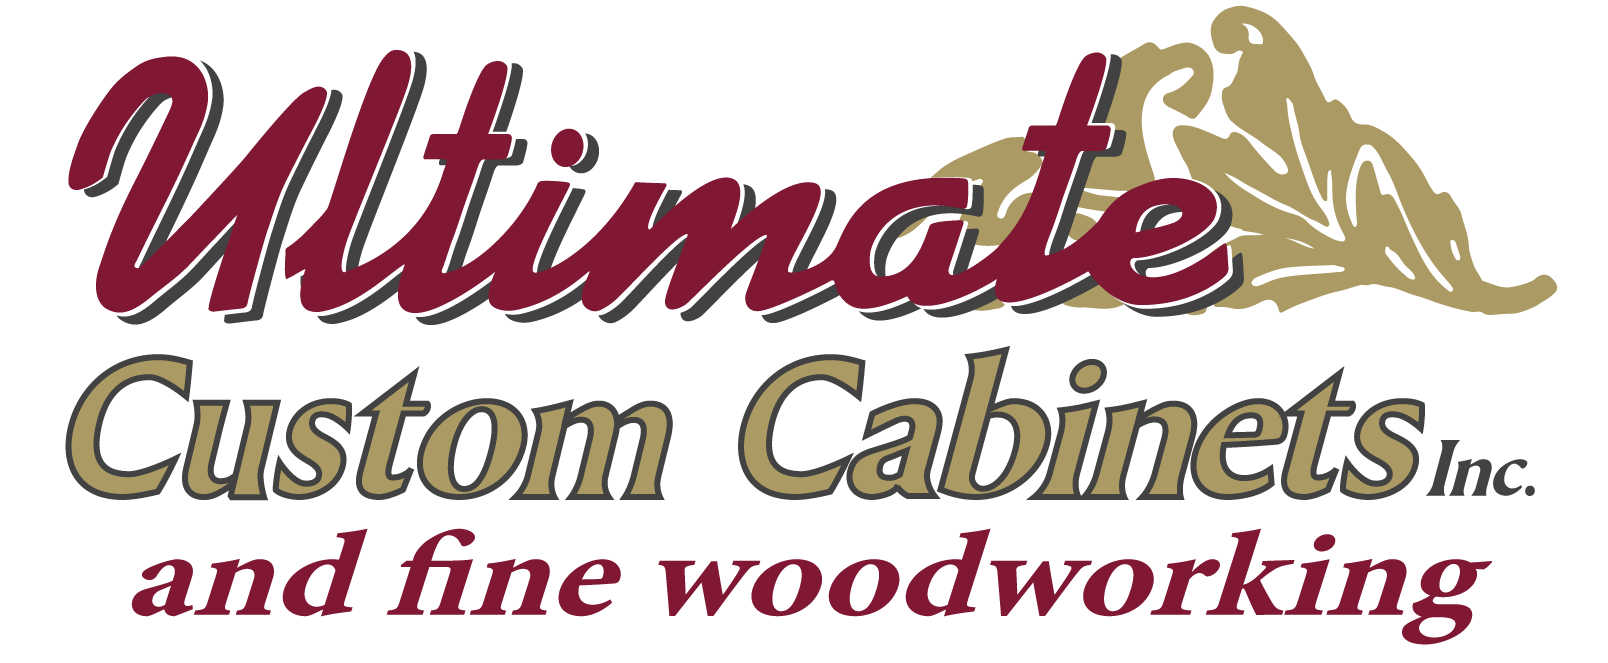 About Us Ultimate Custom Cabinets